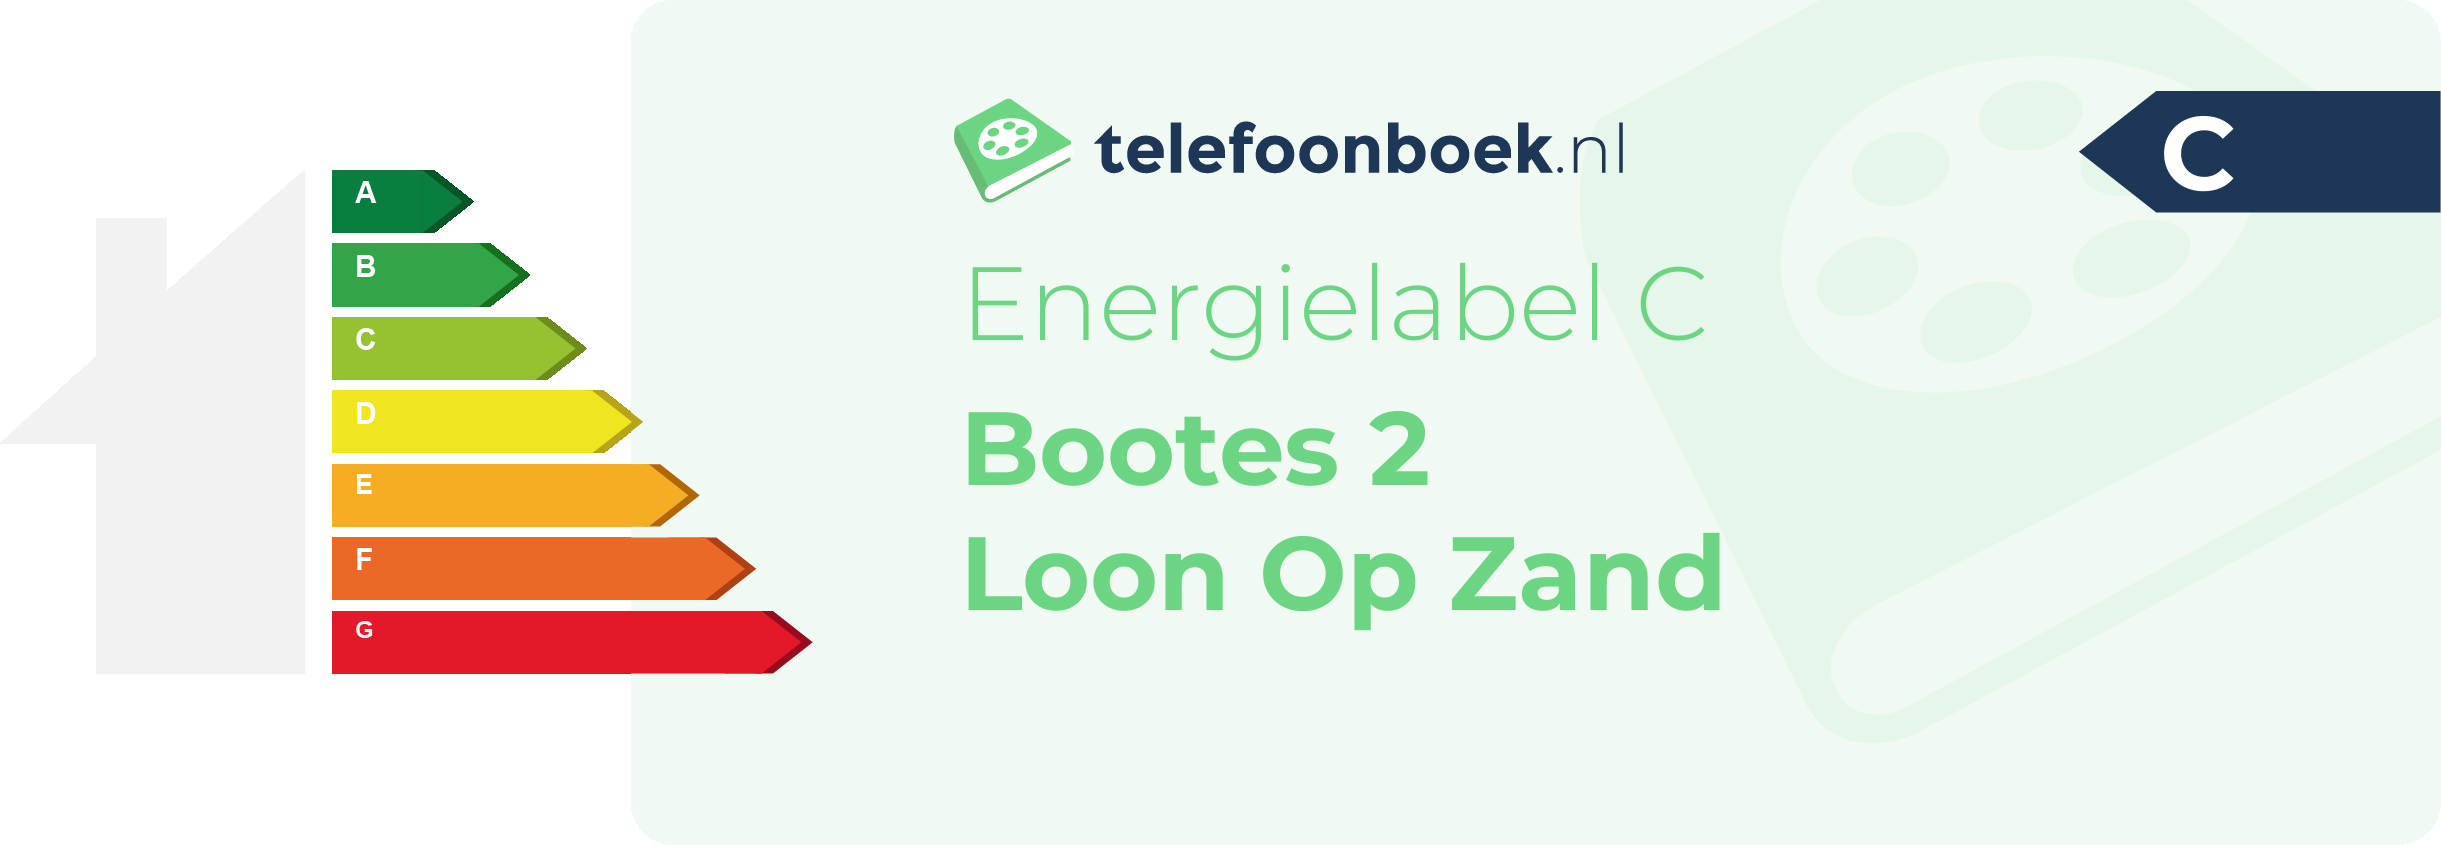 Energielabel Bootes 2 Loon Op Zand